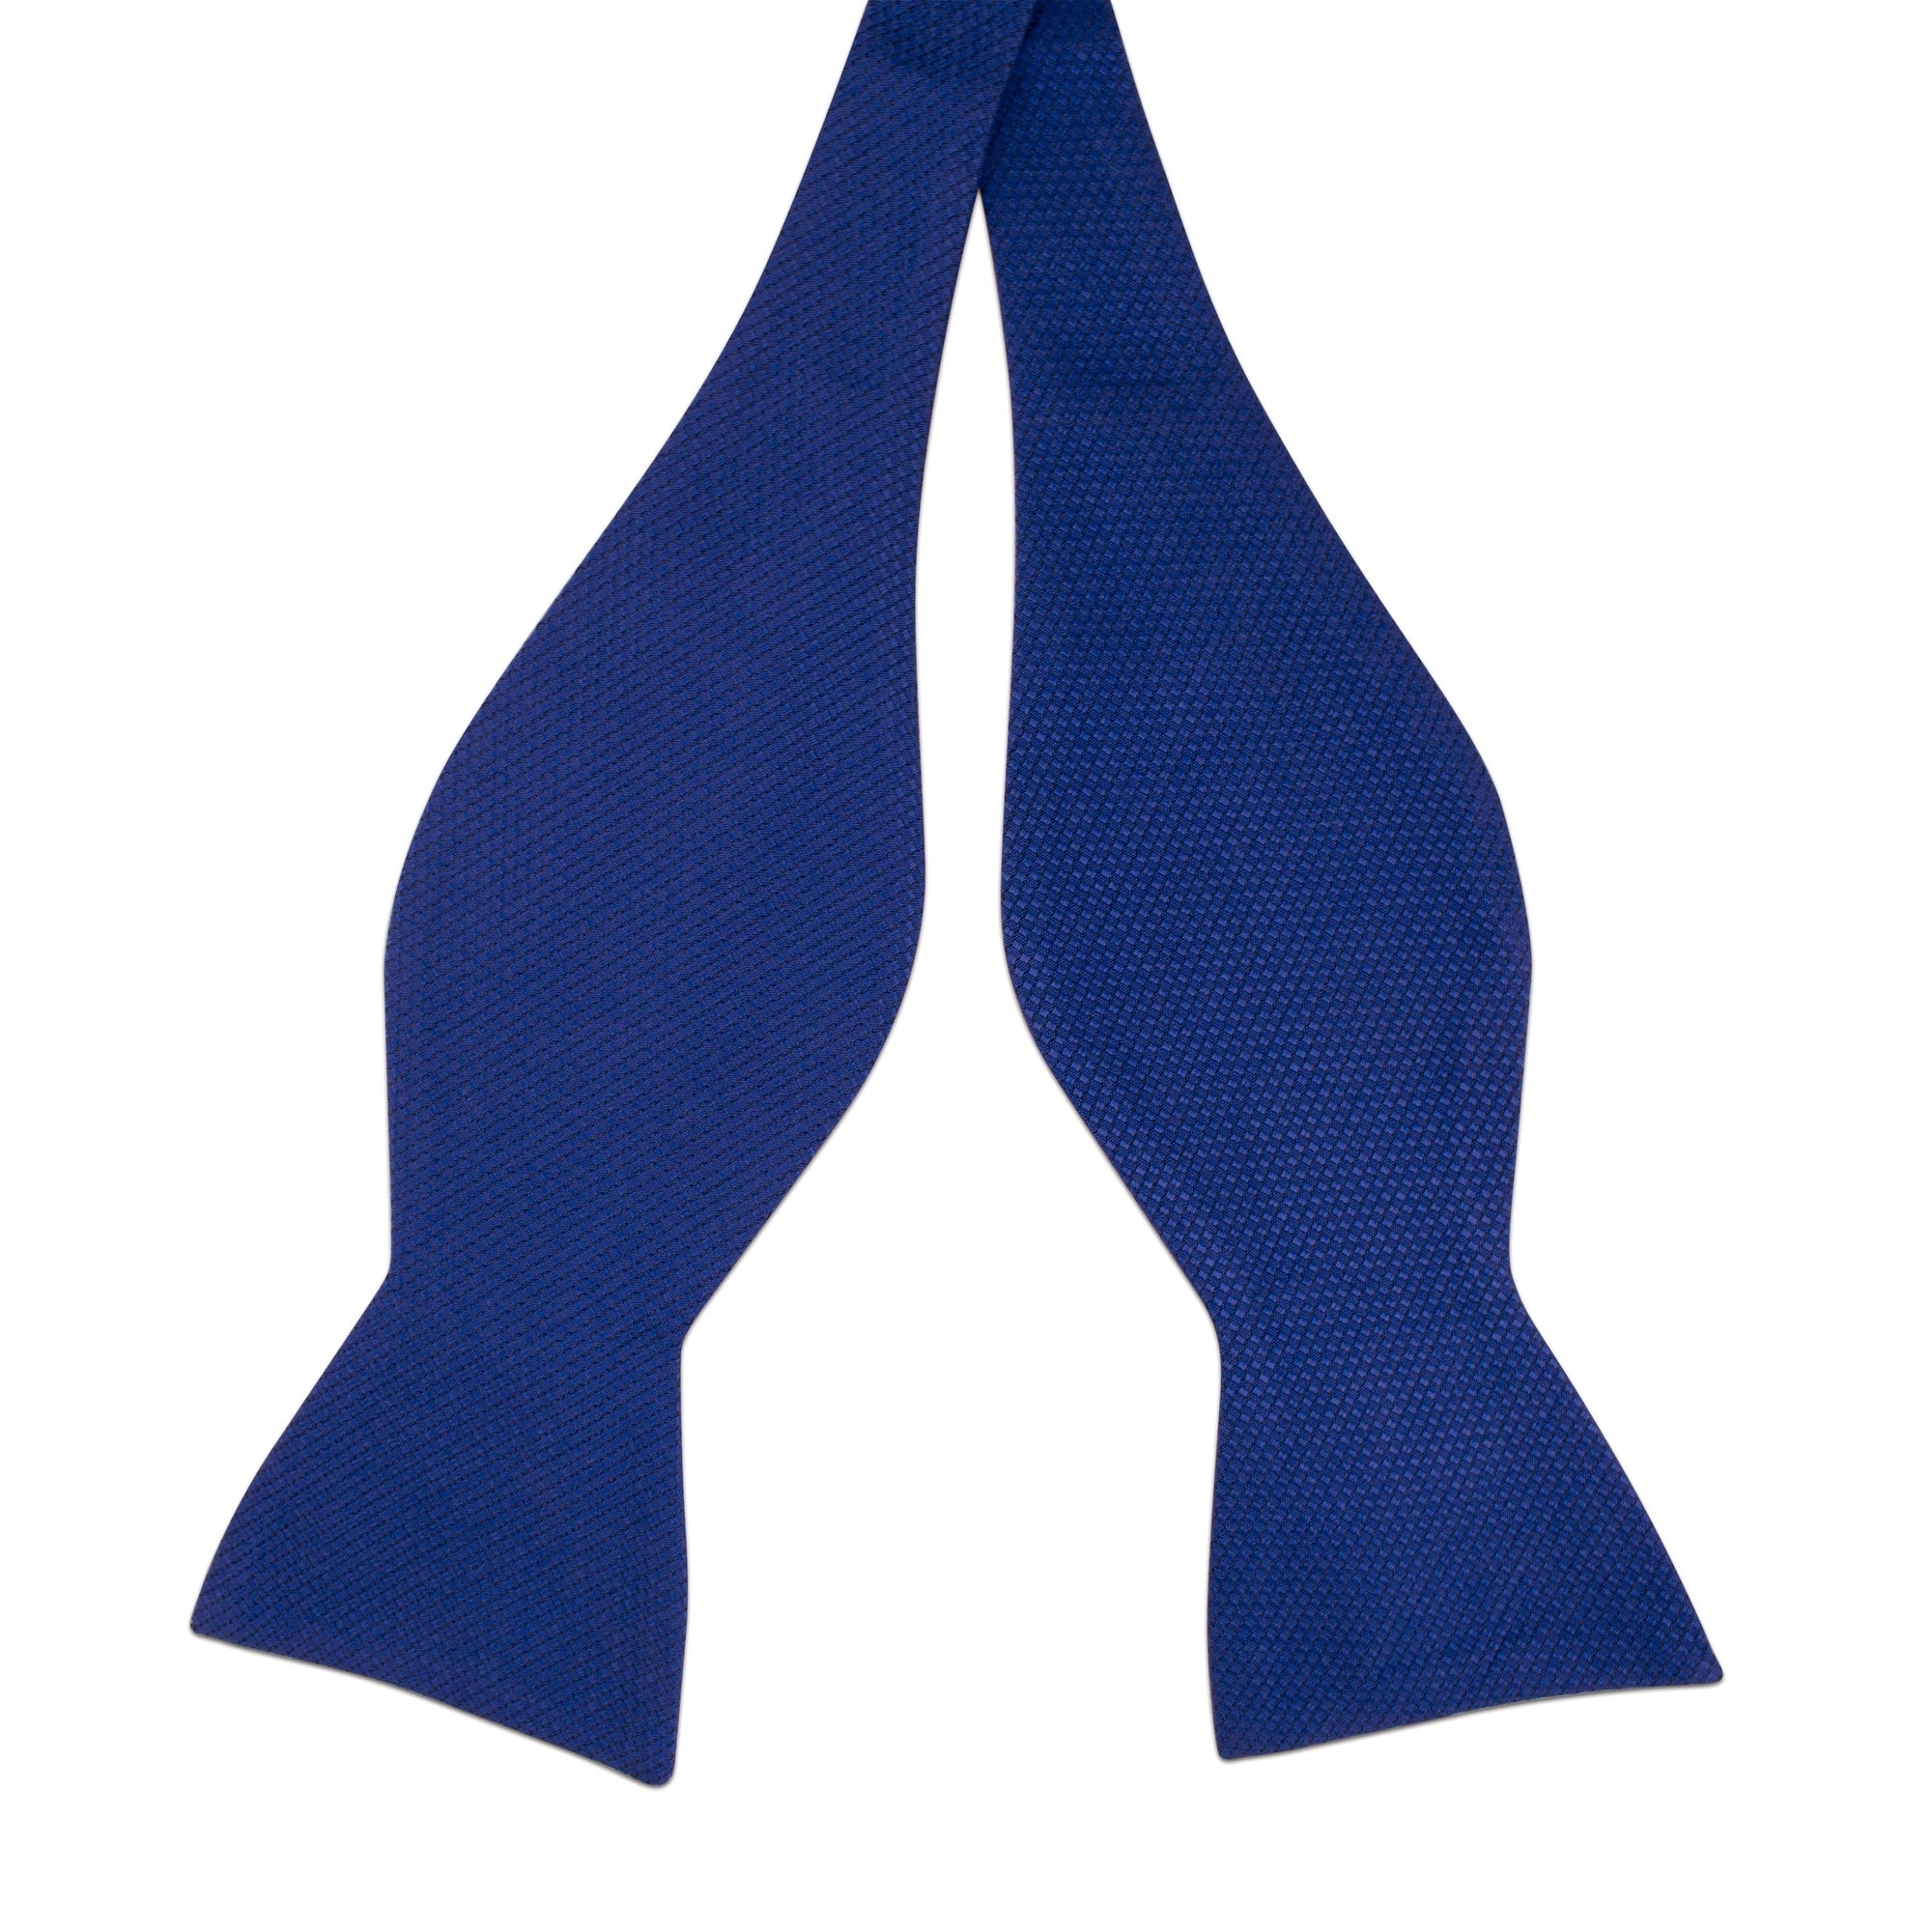 Ultramarine Textured Self Tie and Ready Made Bow Tie-Bow Ties-A.Azthom-Cufflinks.com.sg